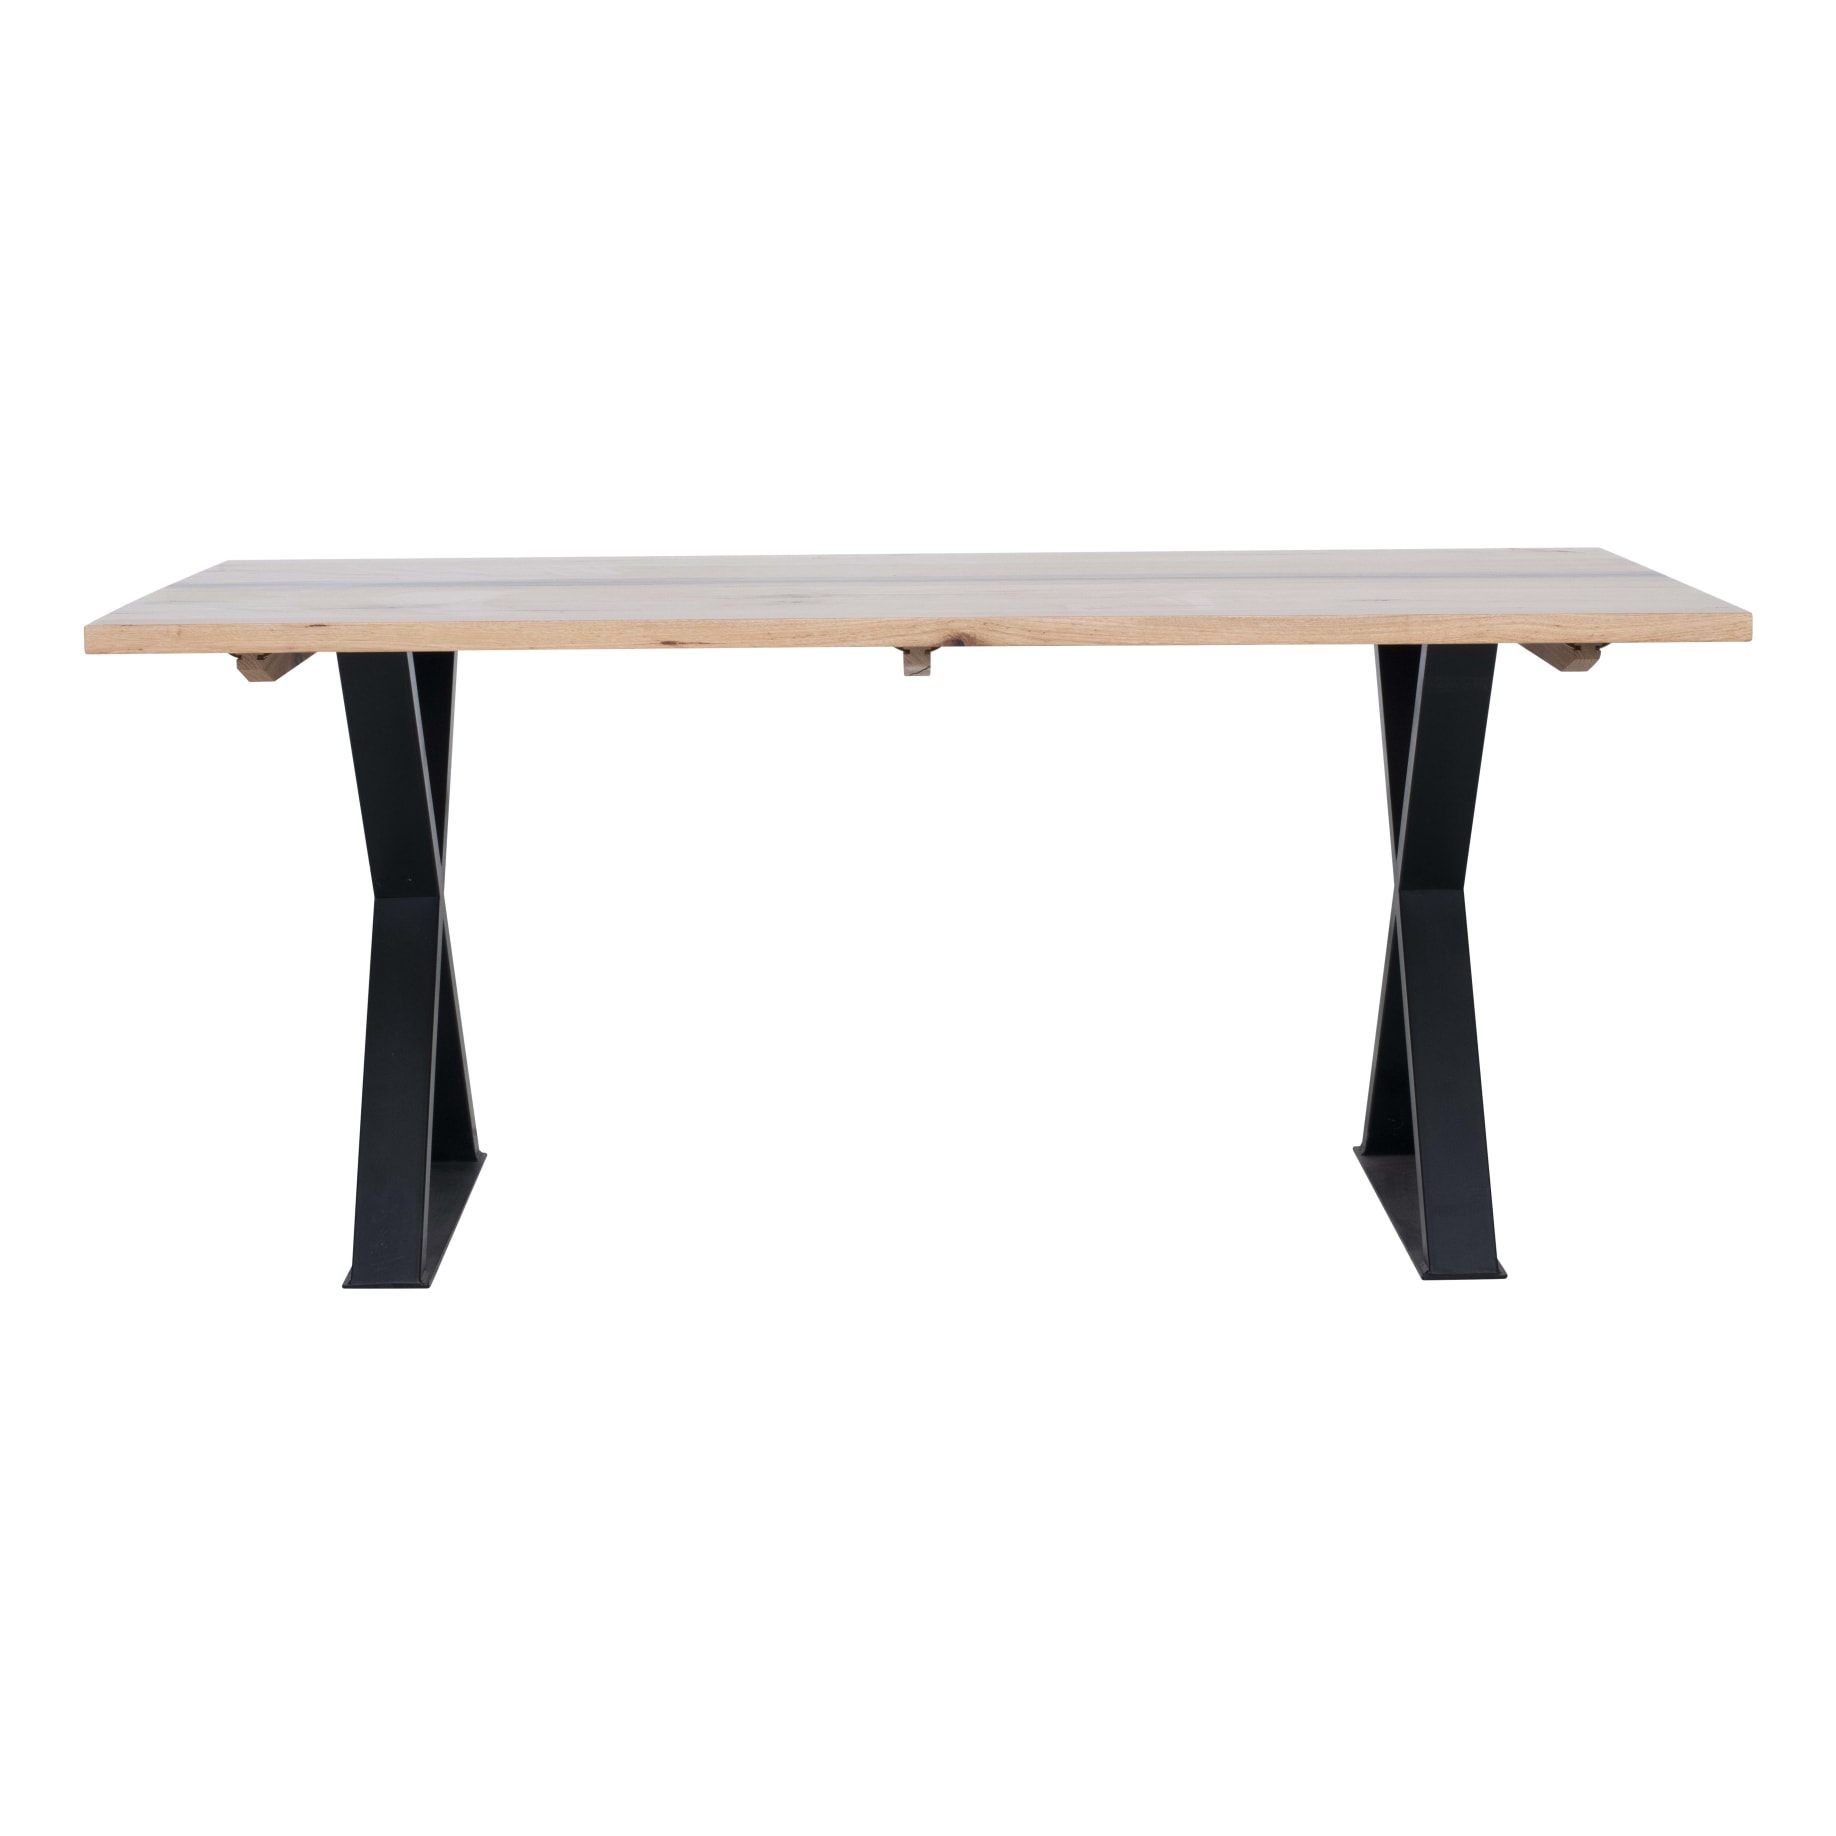 Rawson Dining Table 270cm in Messmate with Resin